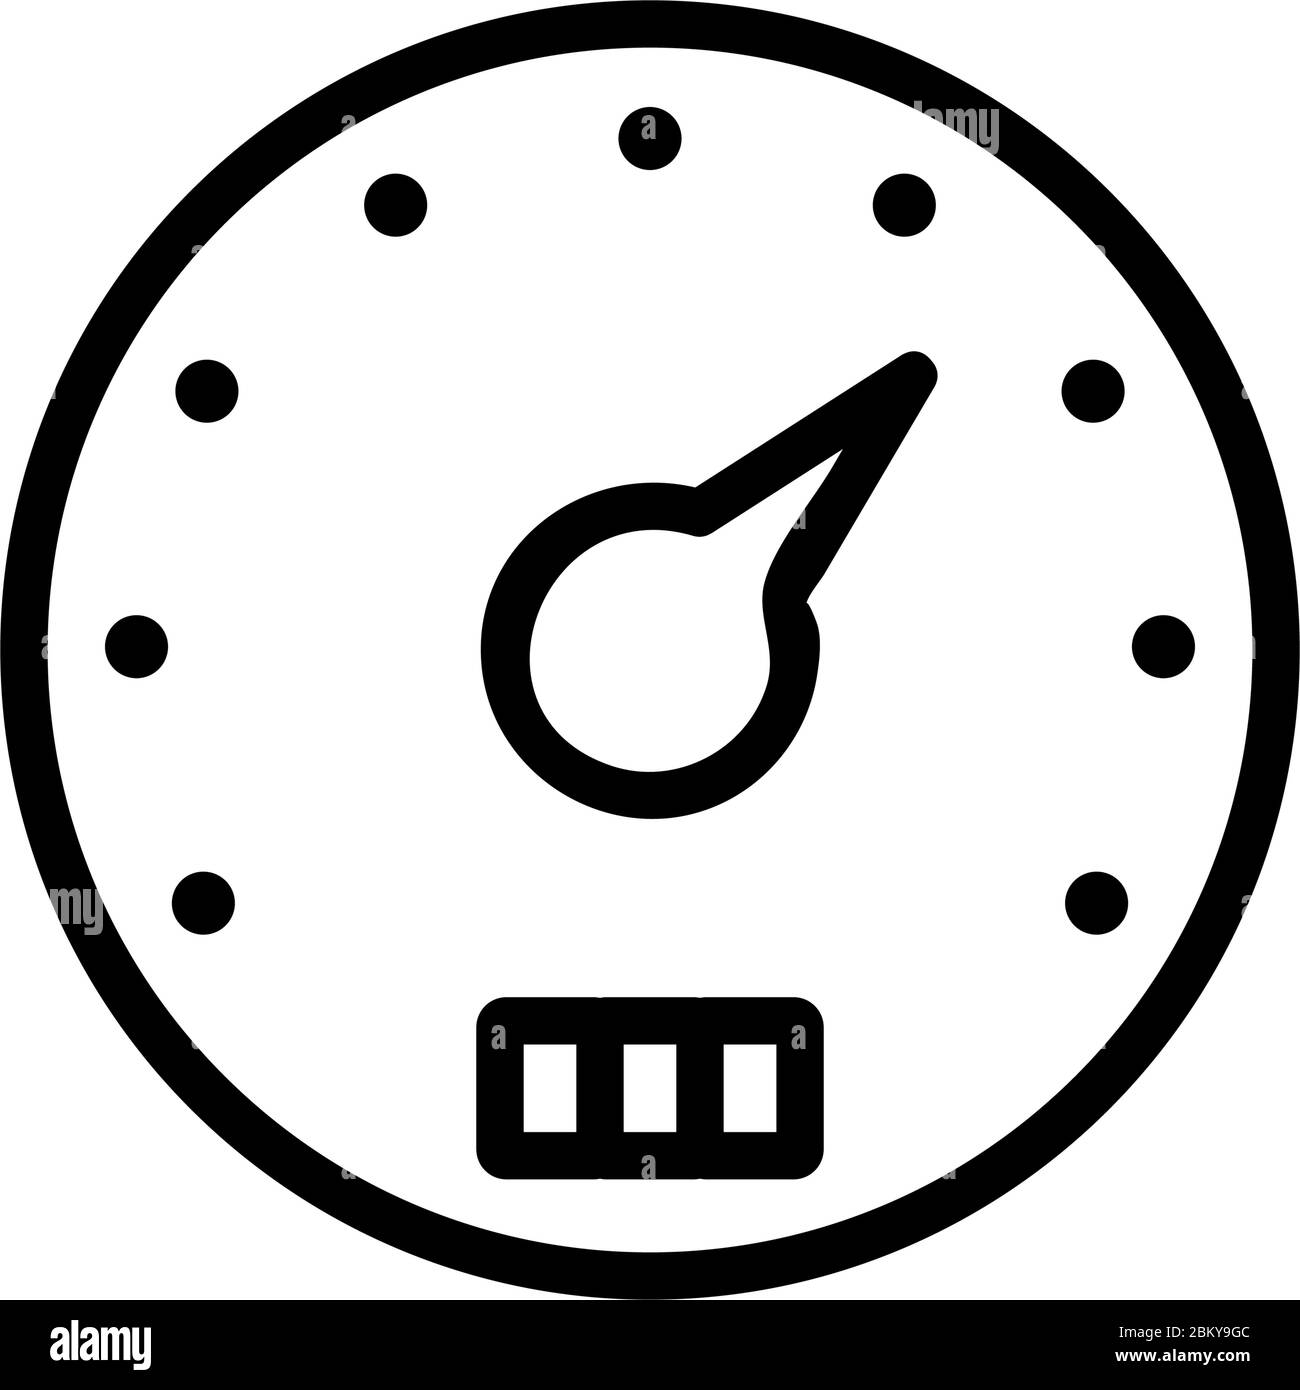 gas speed indicator icon vector outline illustration Stock Vector